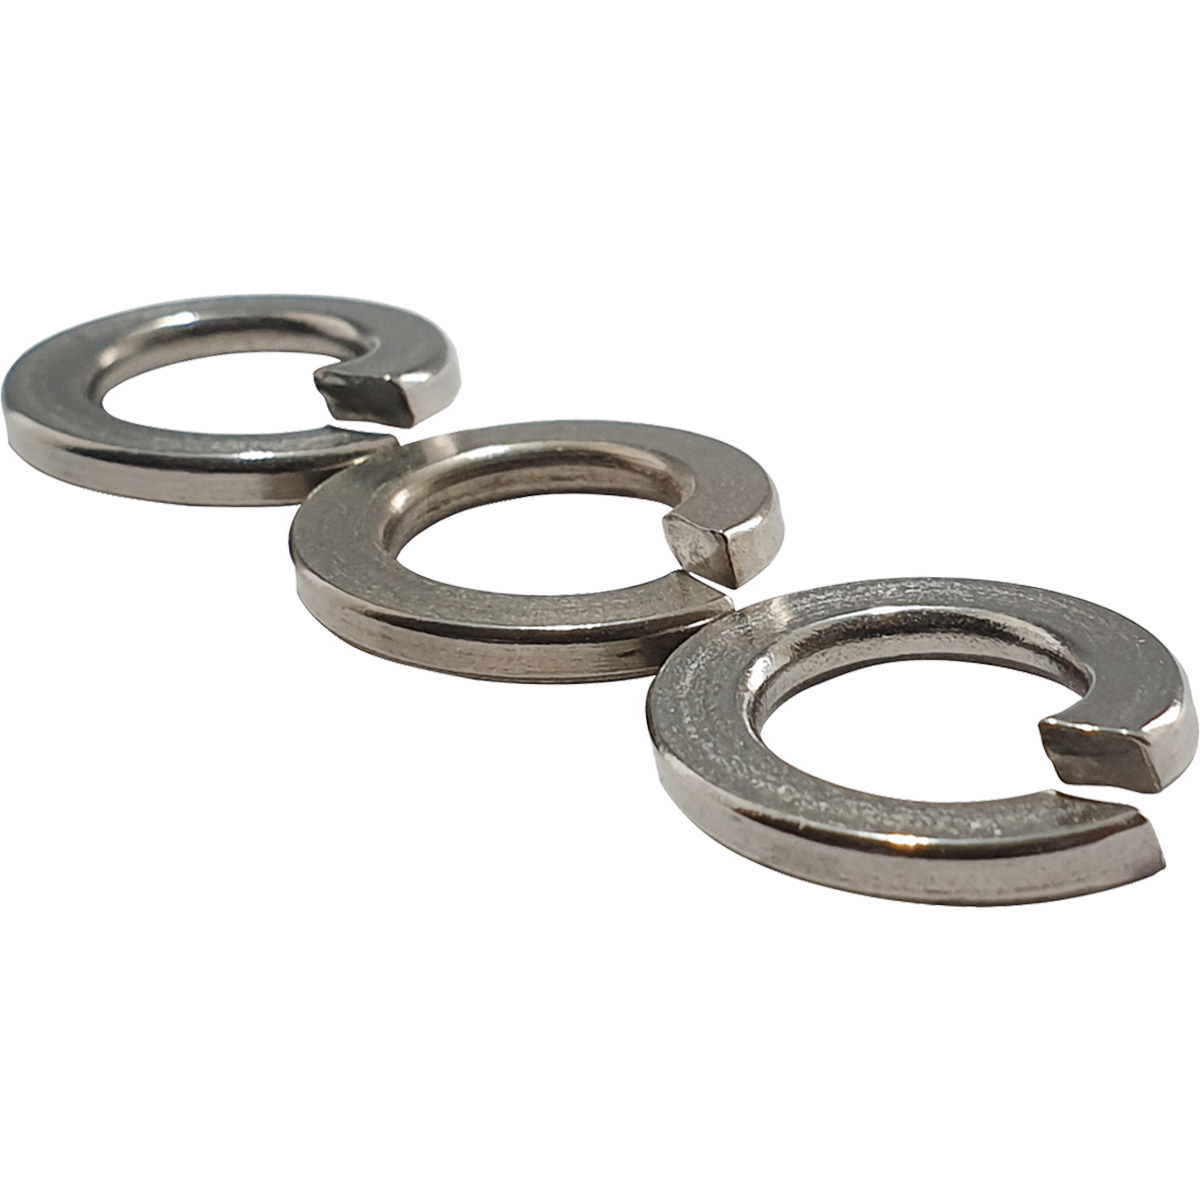 Metric, rectangular Spring Lock Washers, manufactured from A1 stainless steel and available in various diameters at competitive prices. 